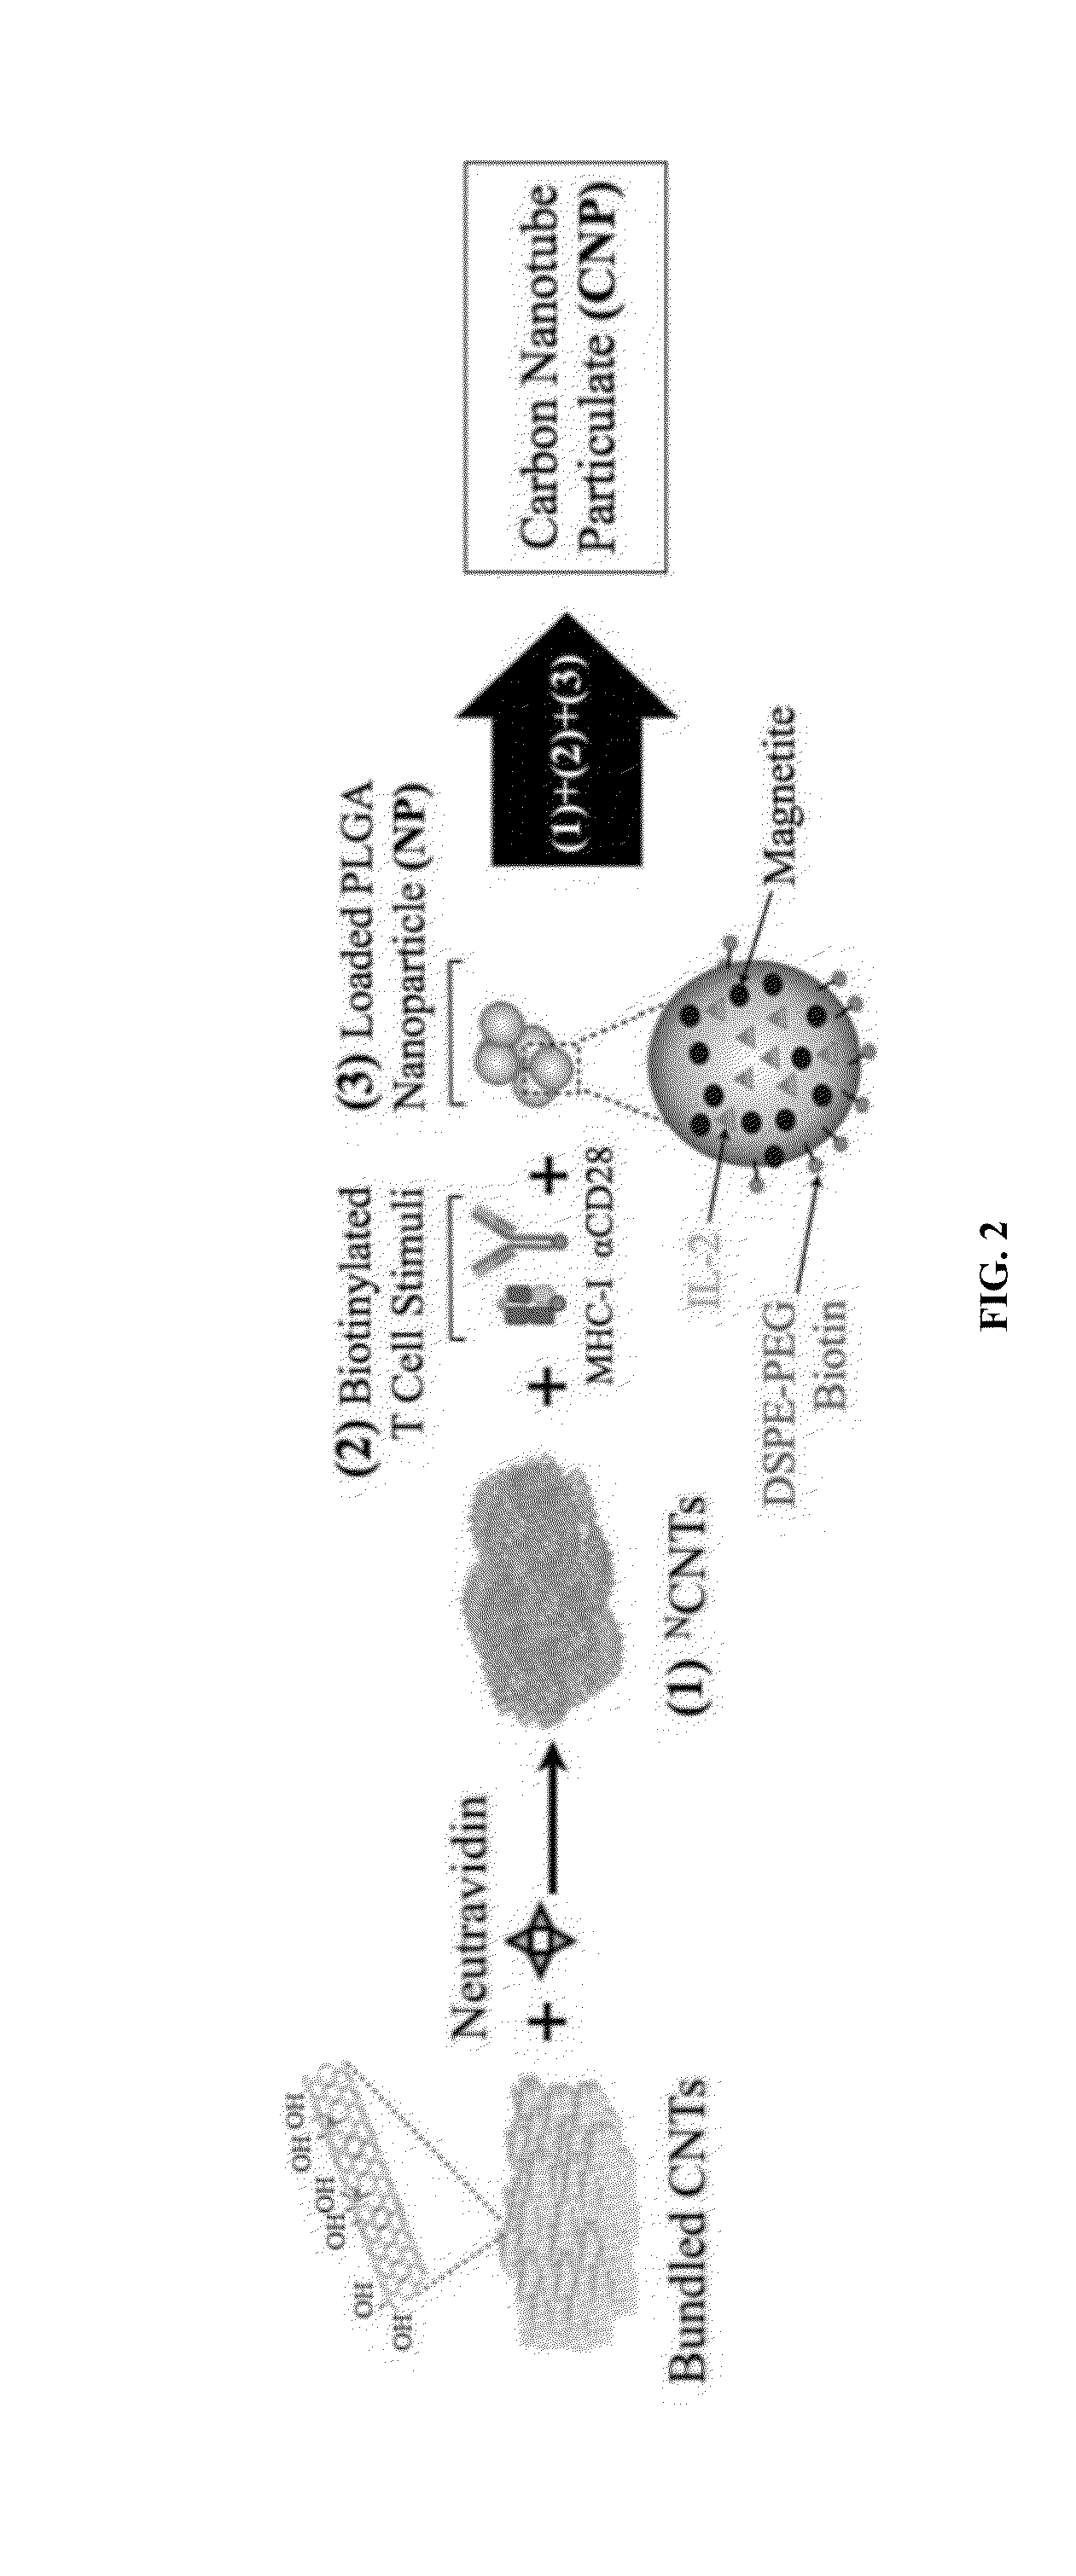 Carbon nanotube compositions and methods of use thereof